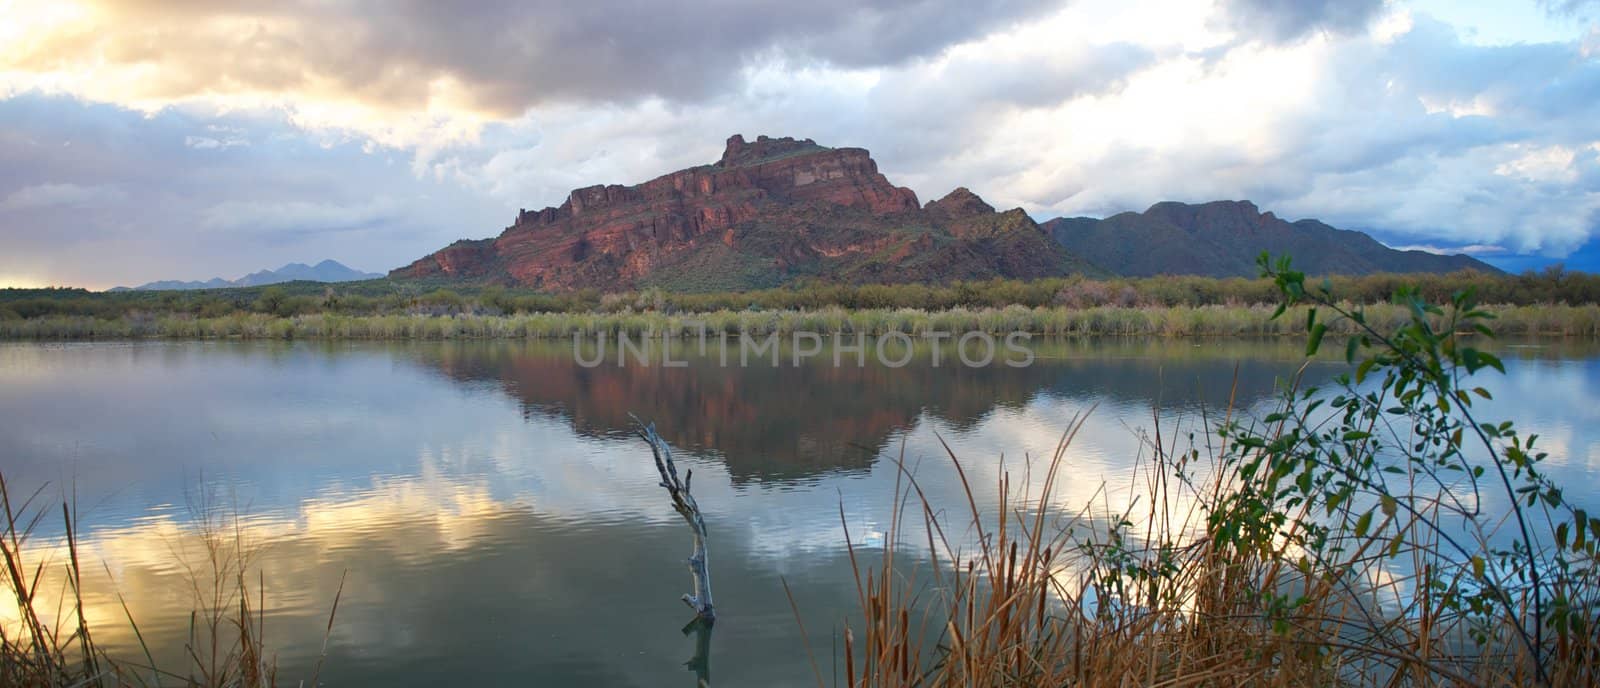 Beautiful green desert mountains with peaceful, calm river, plants, grasses, and large rain clouds